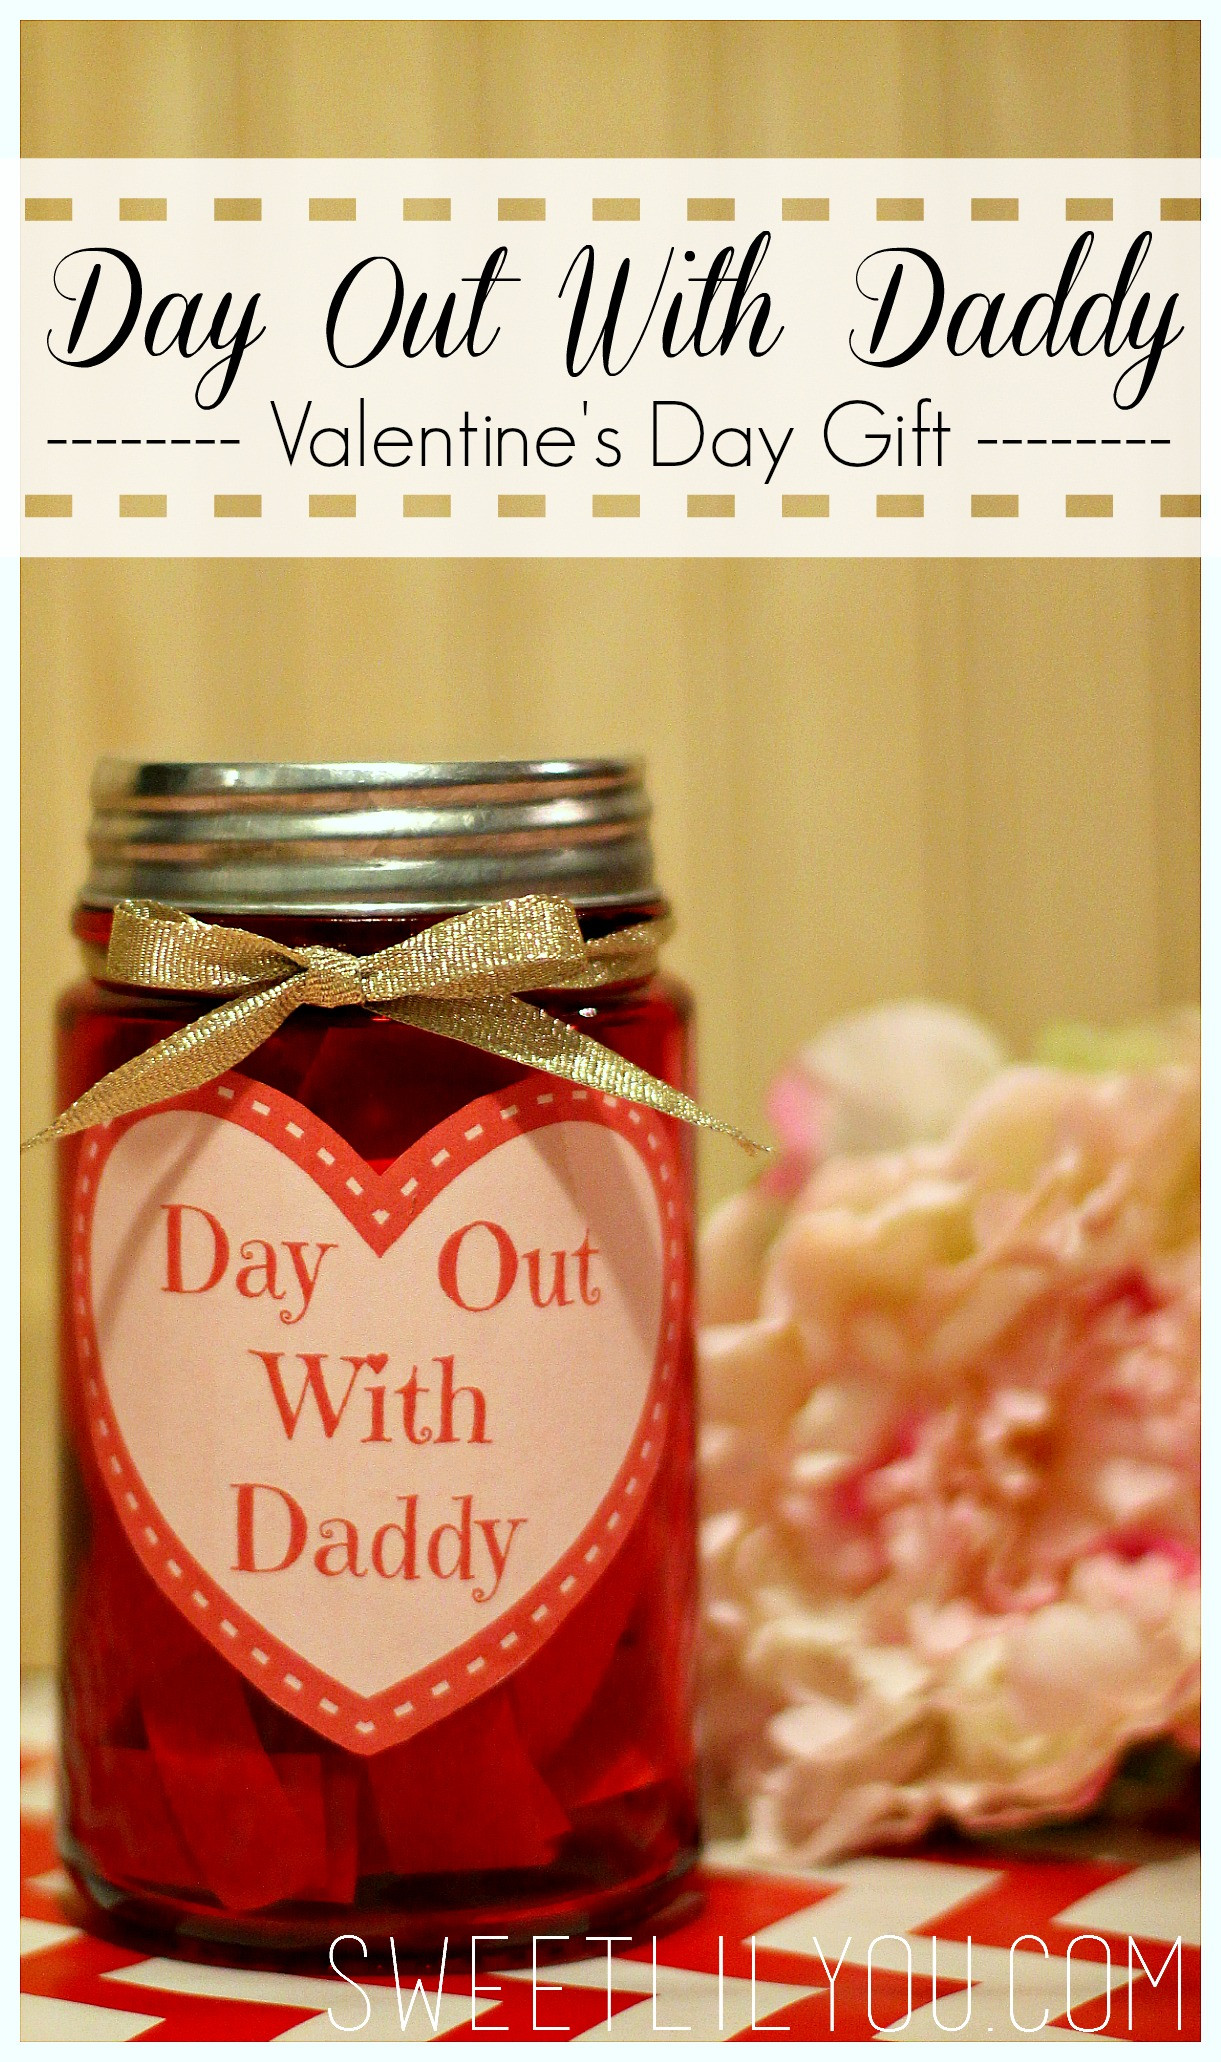 First Valentine'S Day Gift Ideas For Him
 Day Out With Daddy Jar Valentine s Day Gift for Dad